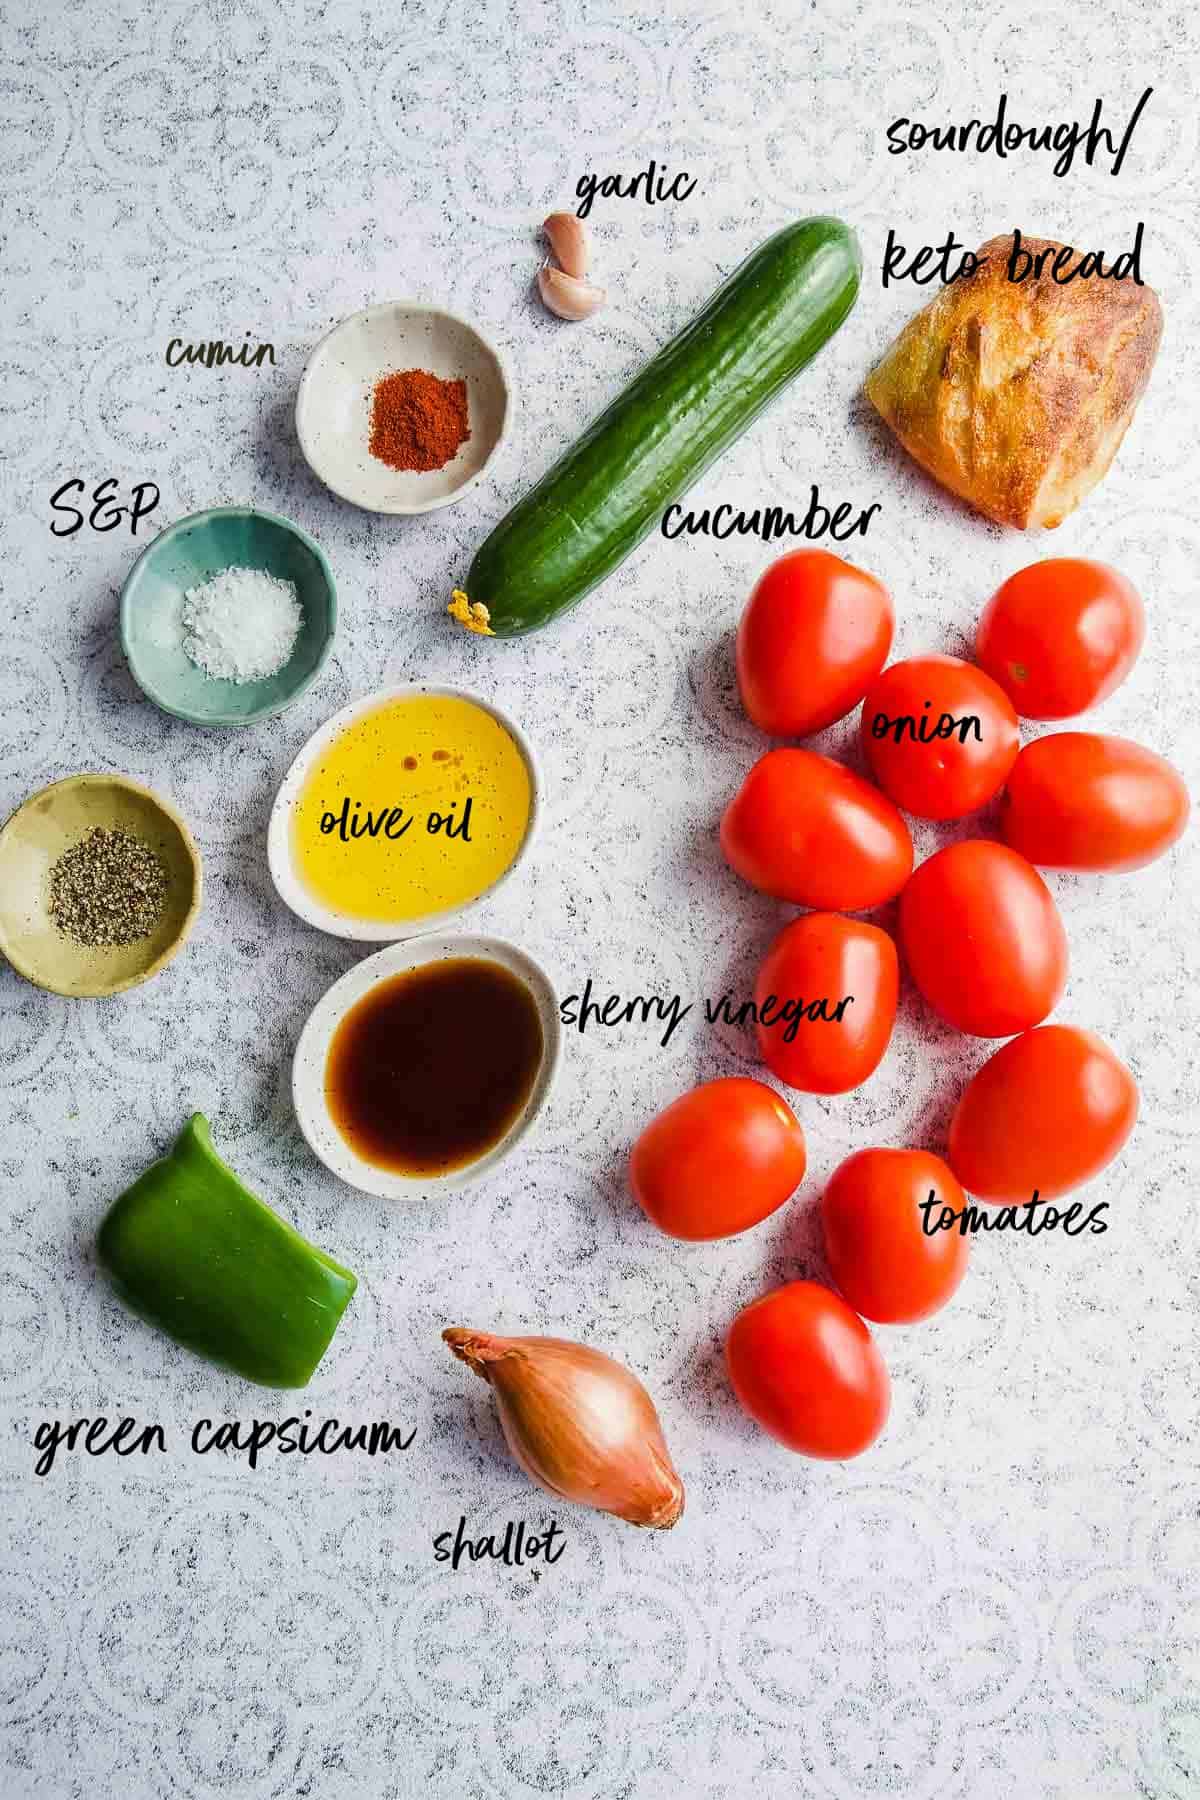 Labelled gazpacho ingredients on a tiled backdrop.